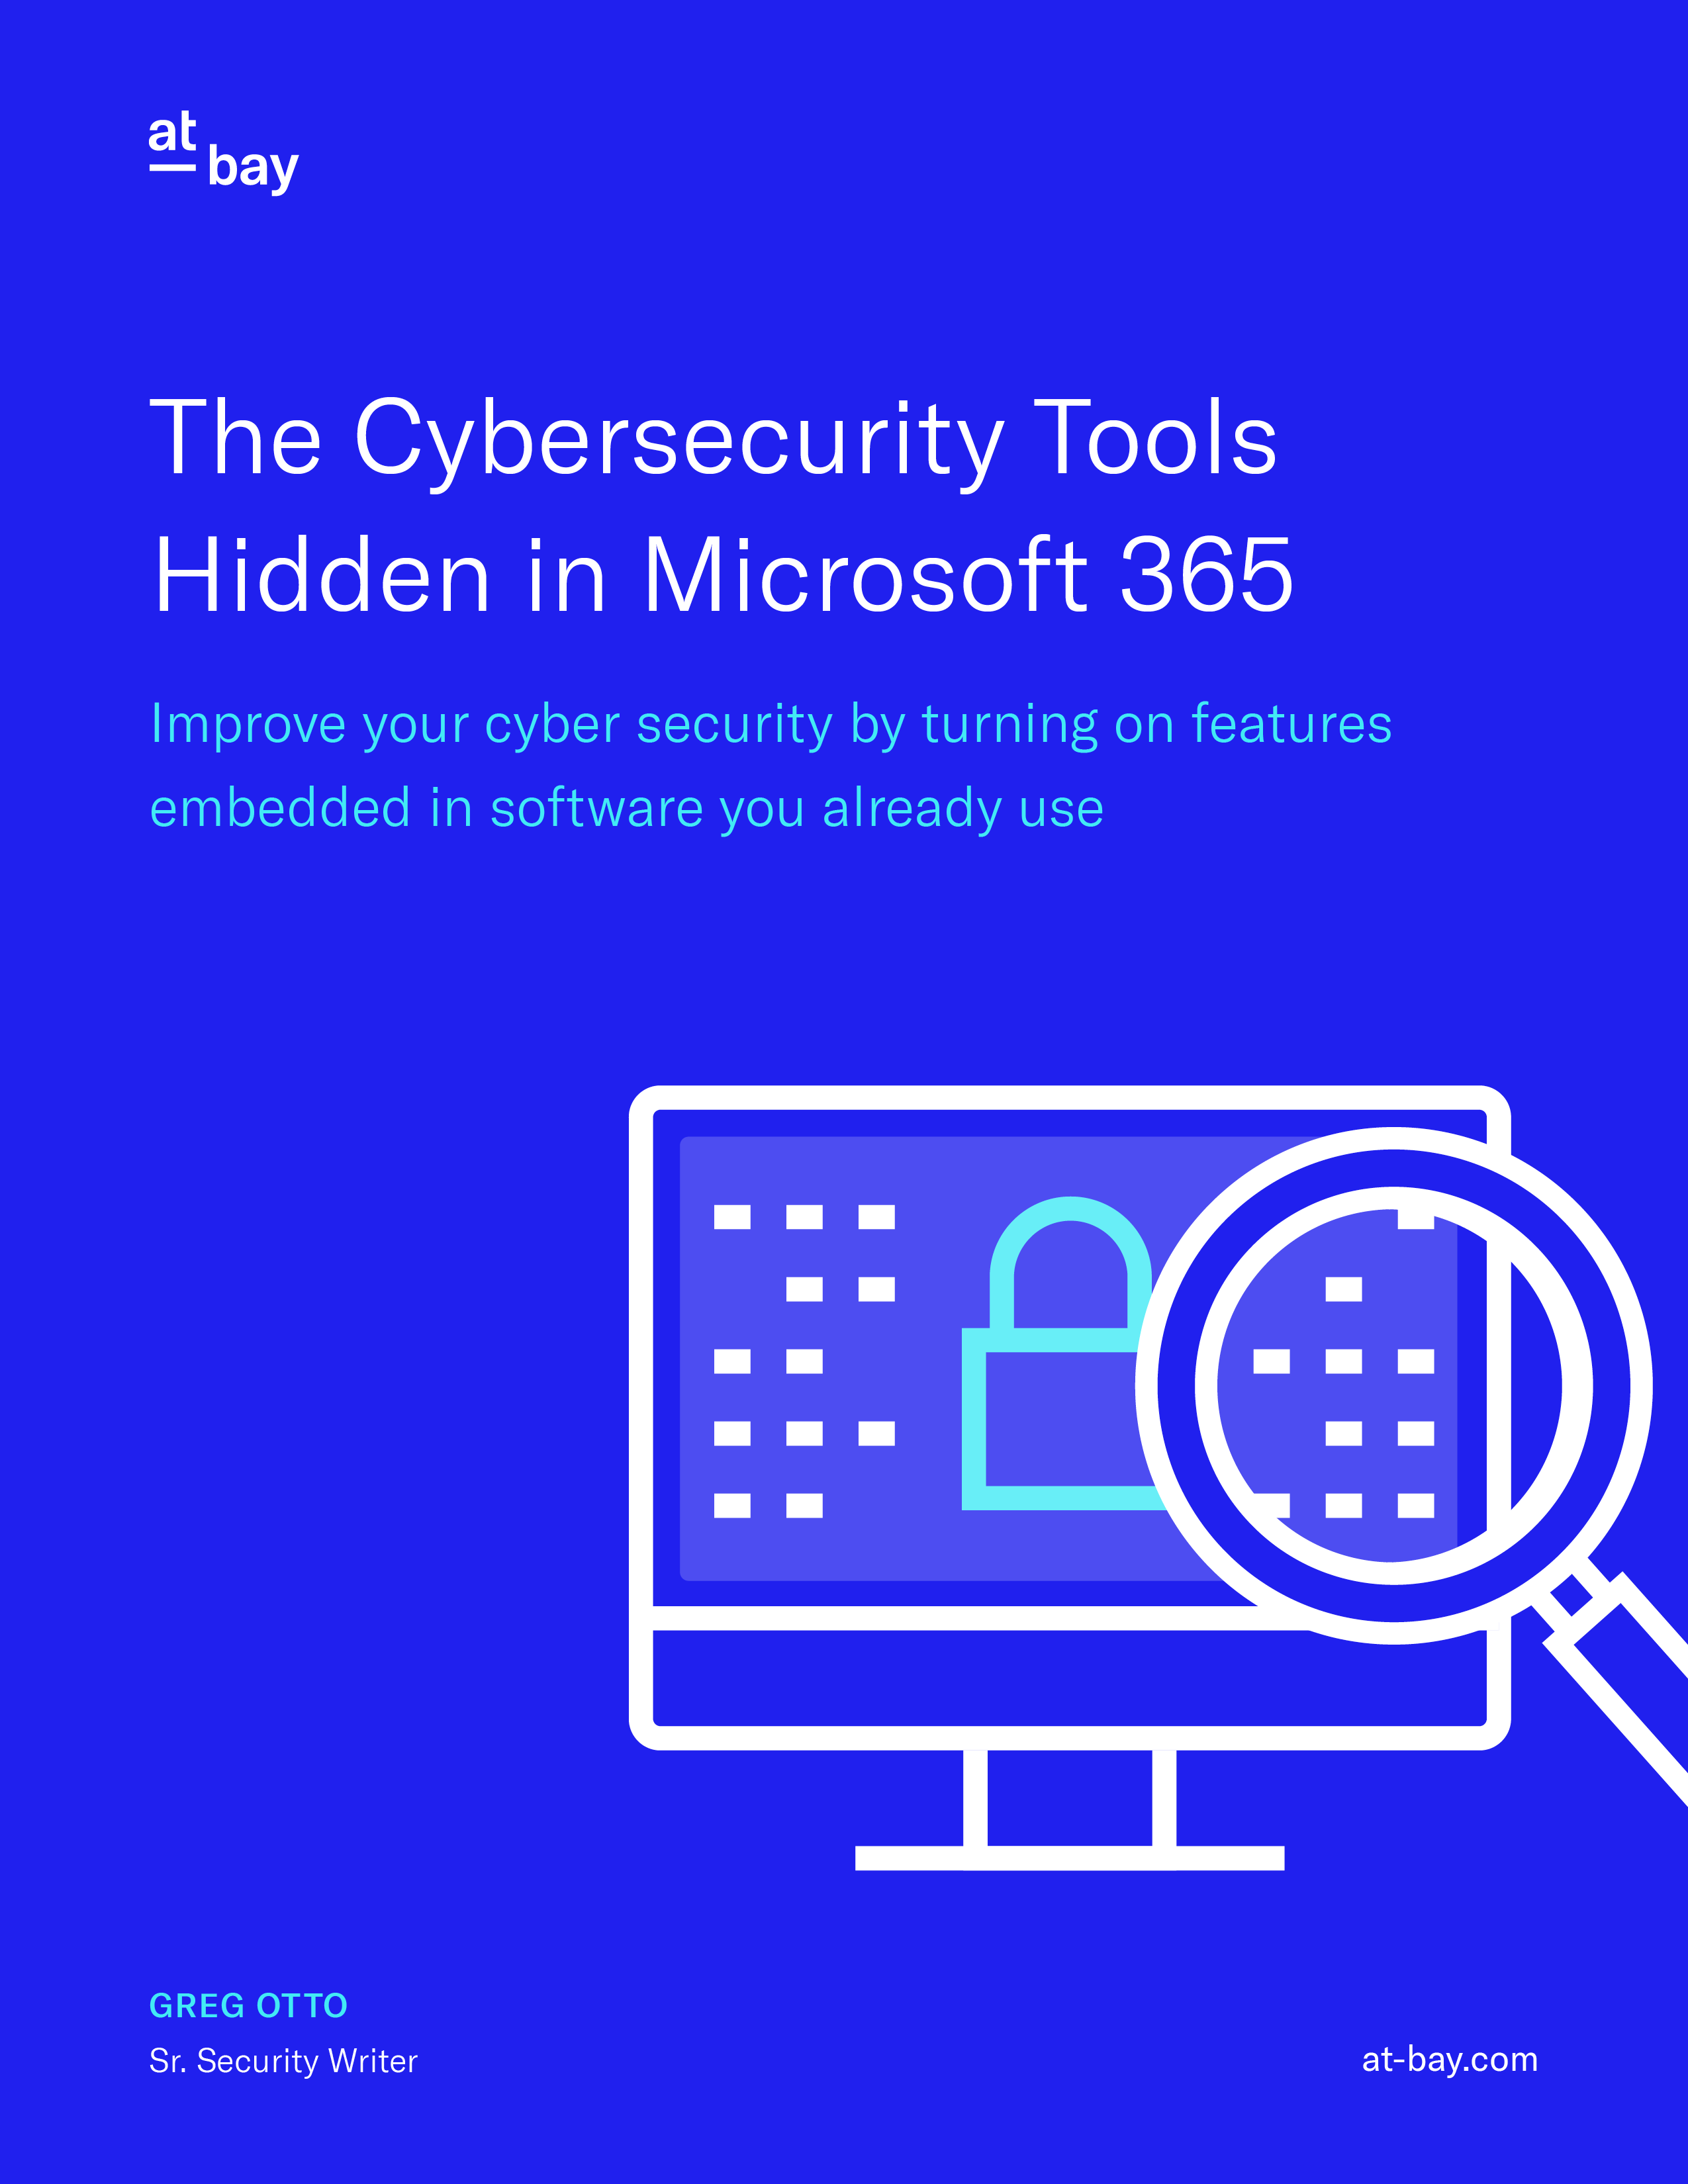 The Cybersecurity Tools Hidden in Microsoft 365